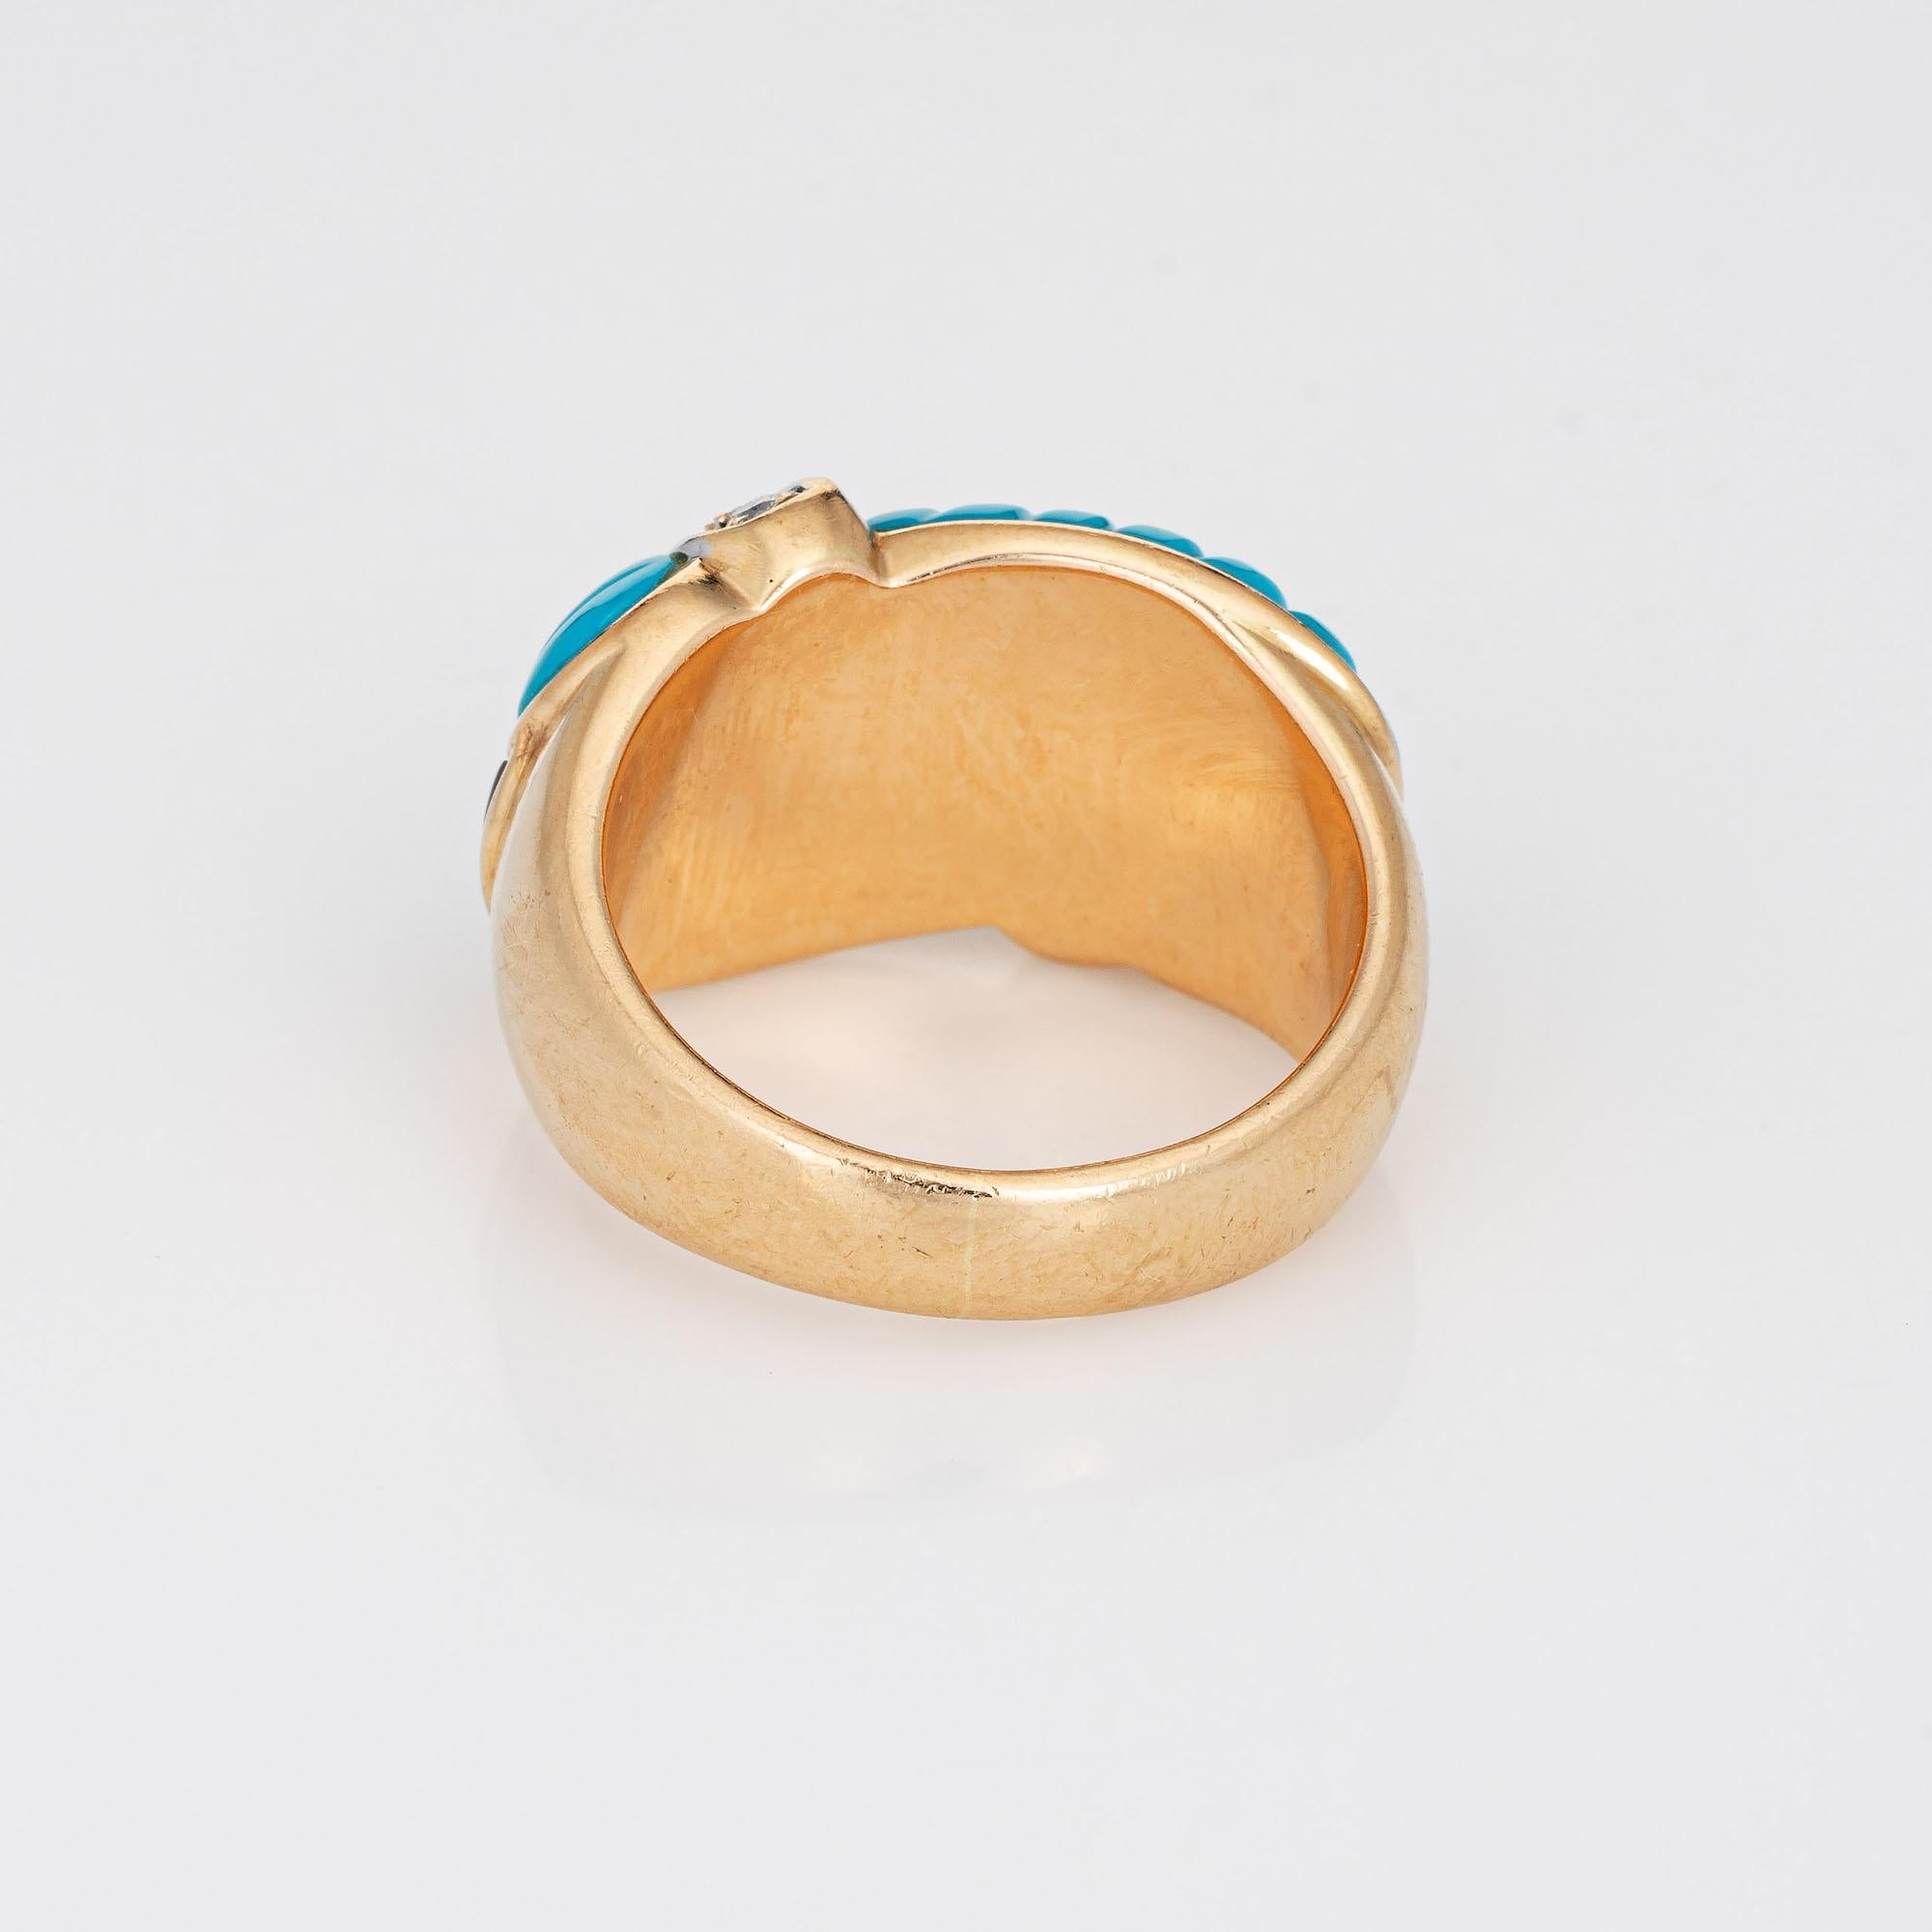 Inlaid Turquoise Lapis Diamond Band 14k Yellow Gold Sz 6 Ring Estate Jewelry  In Good Condition For Sale In Torrance, CA